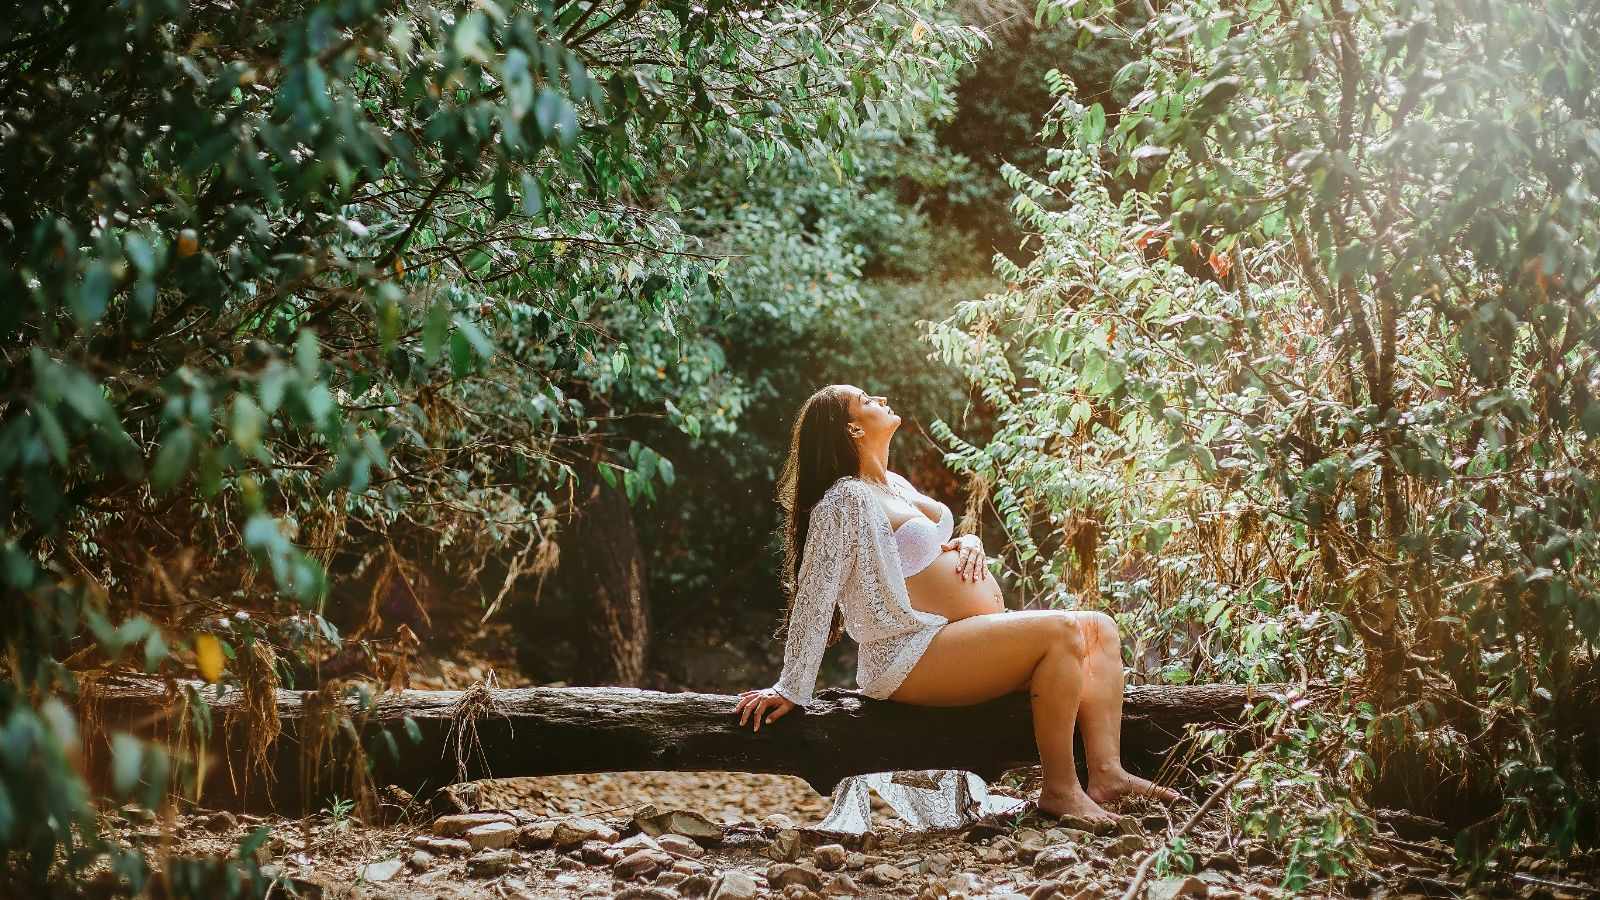 A pregnant woman sunbathes in the forest.